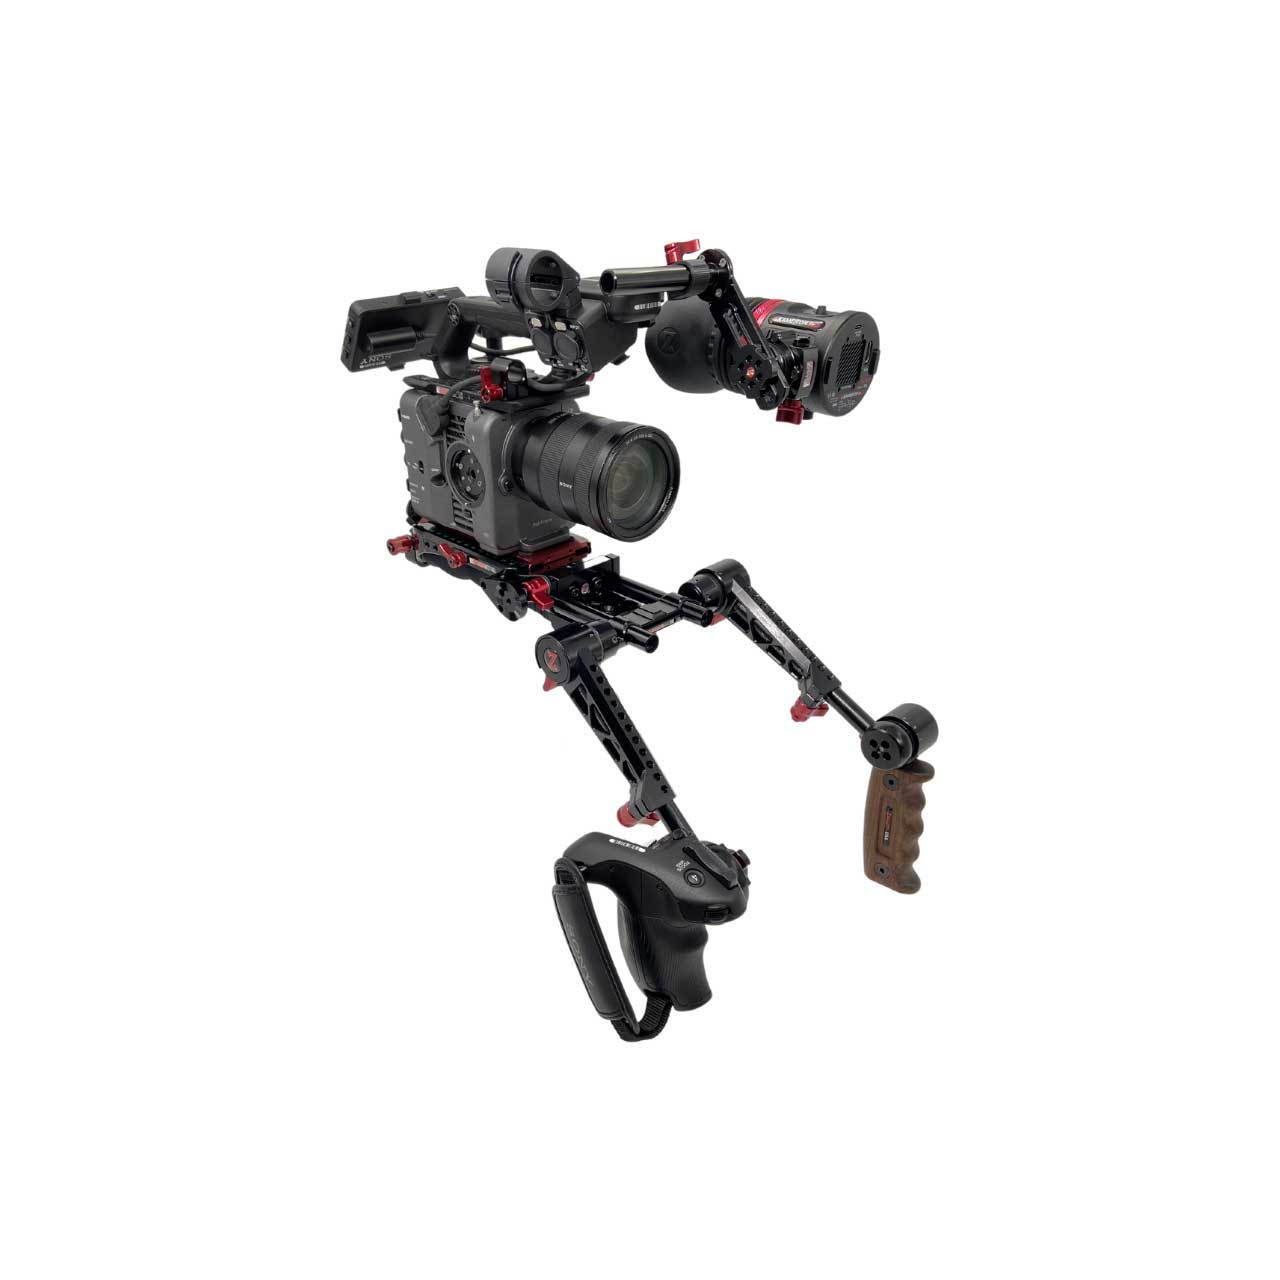 Zacuto Z-SX6-PDG Sony FX6 Recoil Pro with Dual Trigger Grips